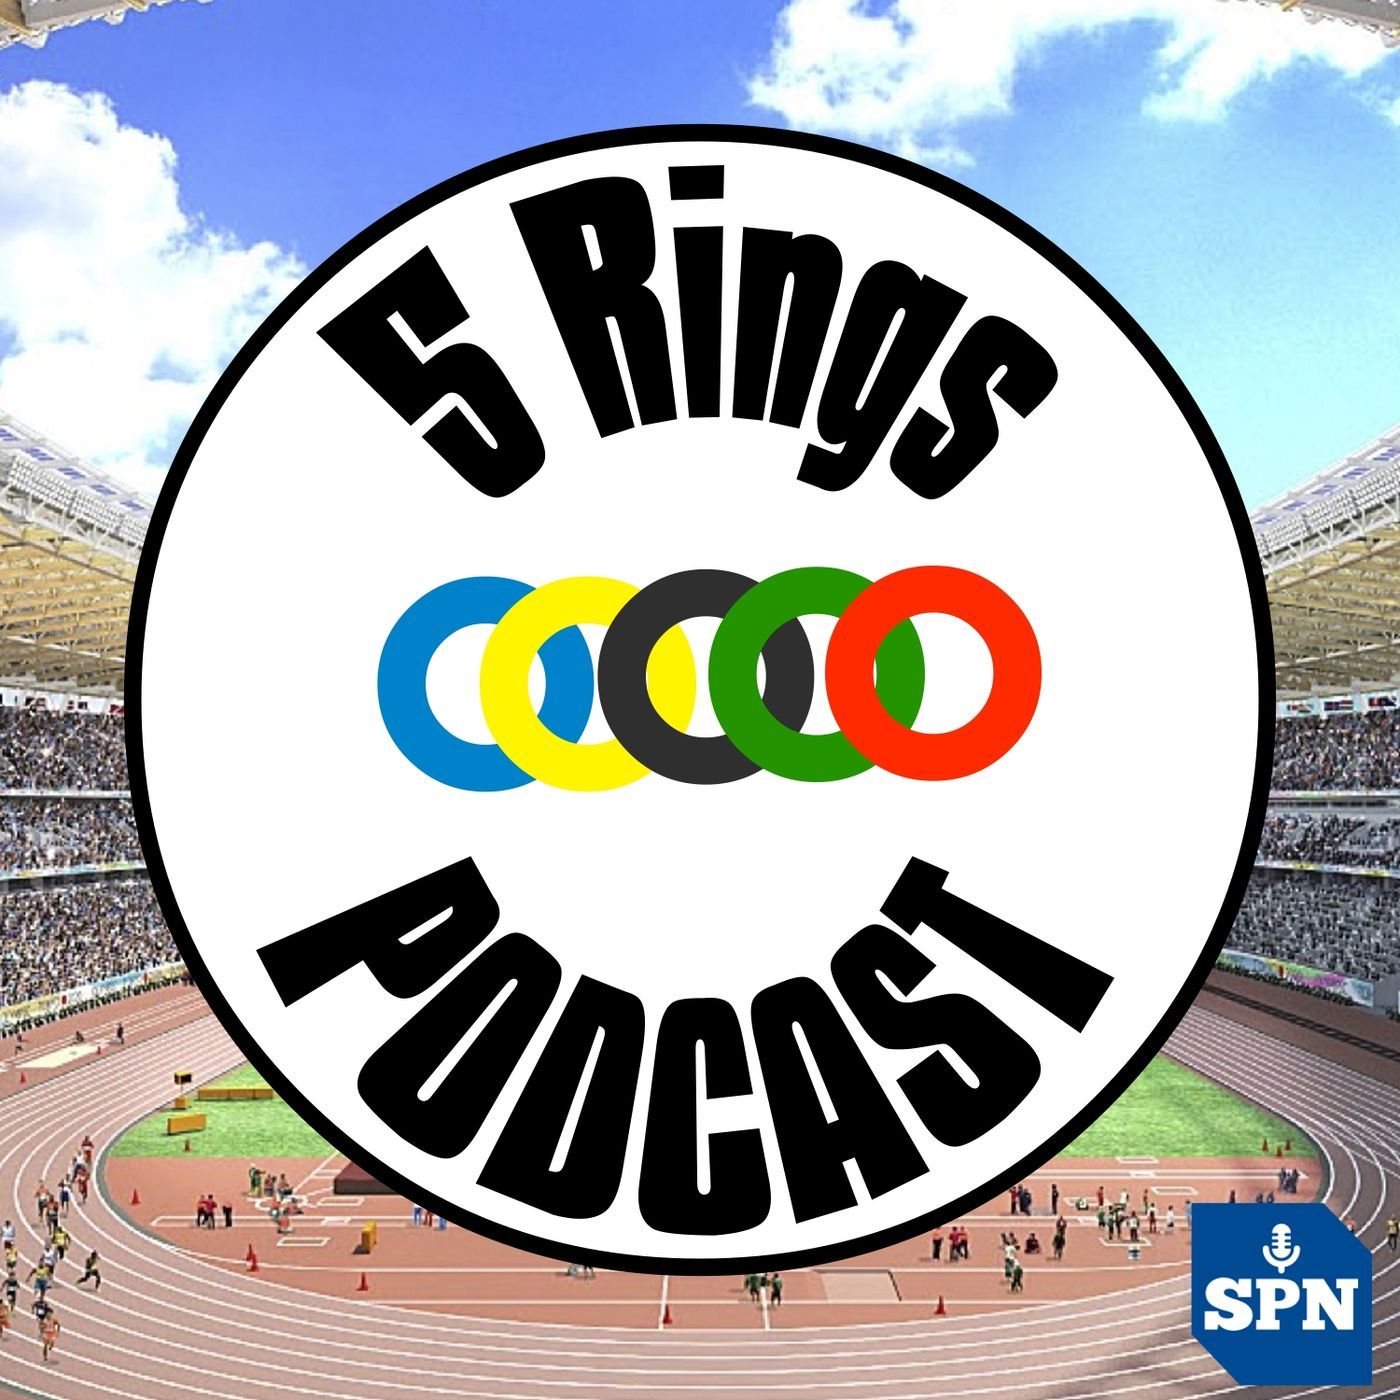 5 Rings Podcast - Daily Coverage of Tokyo 2020 with Kevin Laramee and Duane Rollins - Day 3 Review